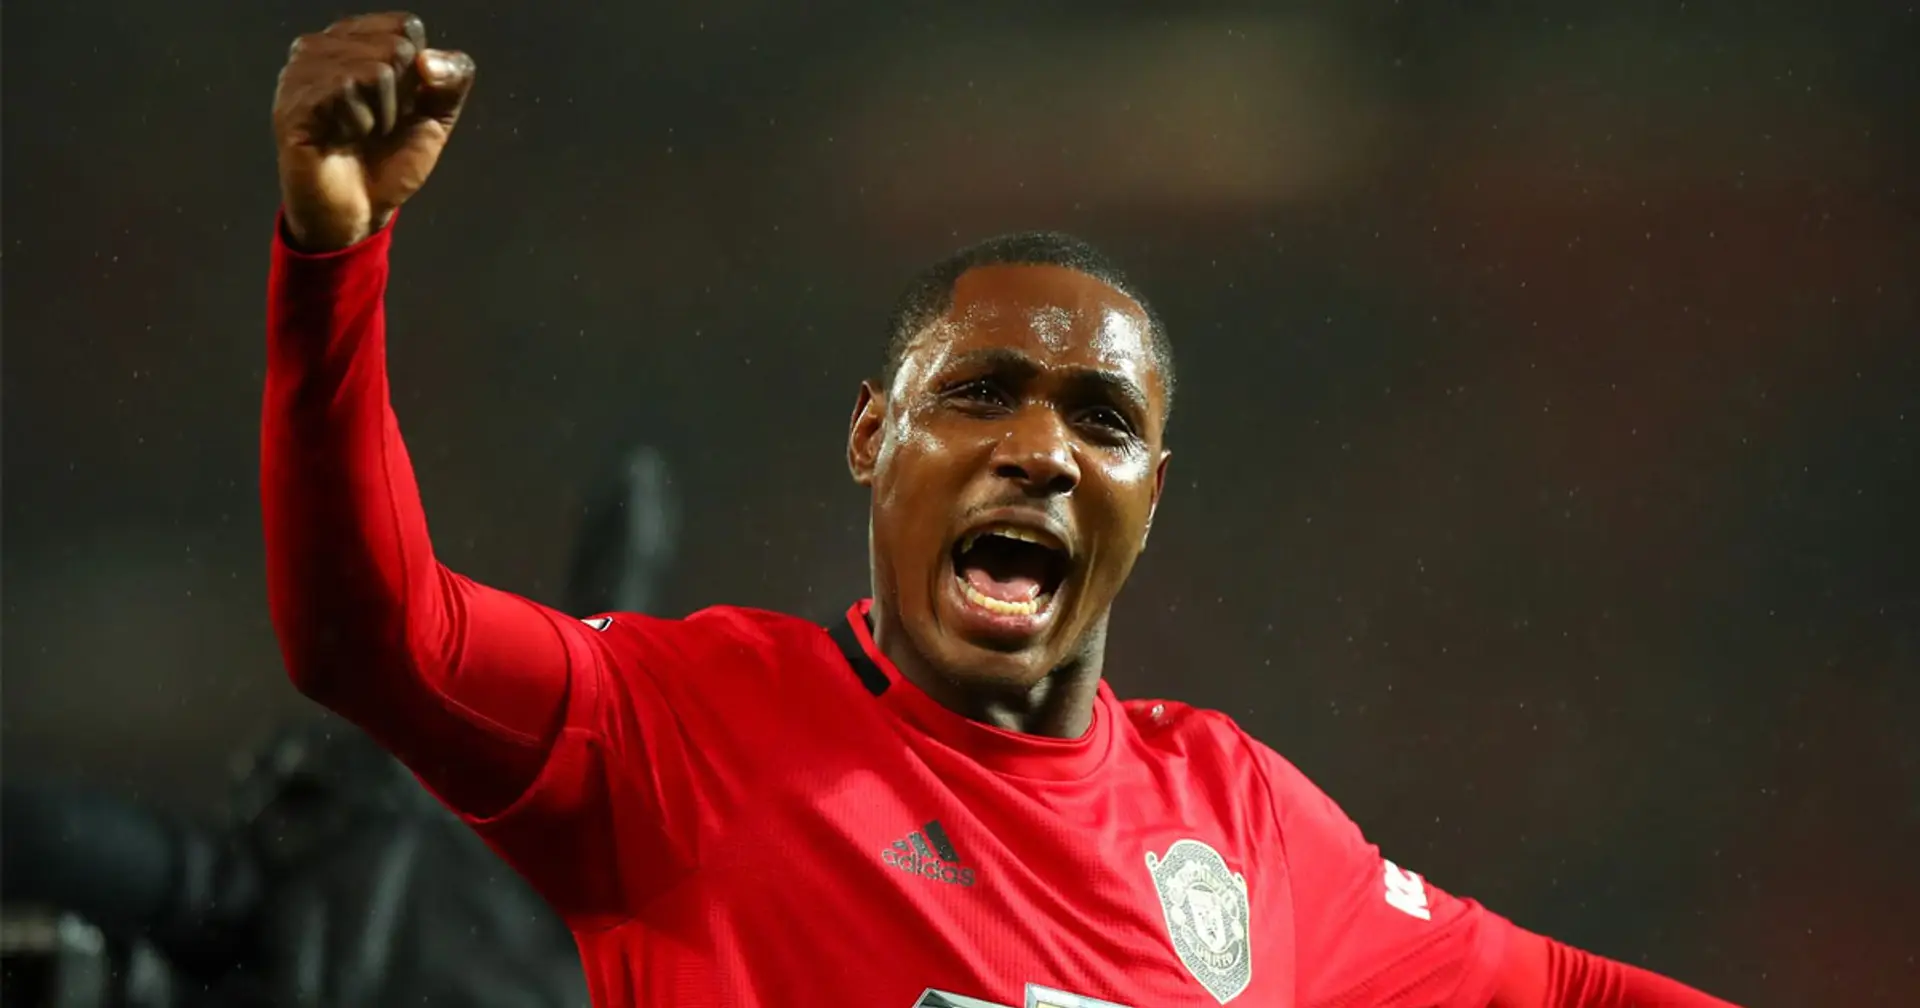 ‘Gave his all and was never lazy on the pitch’: United fans pay tribute to Ighalo ahead of possible farewell game